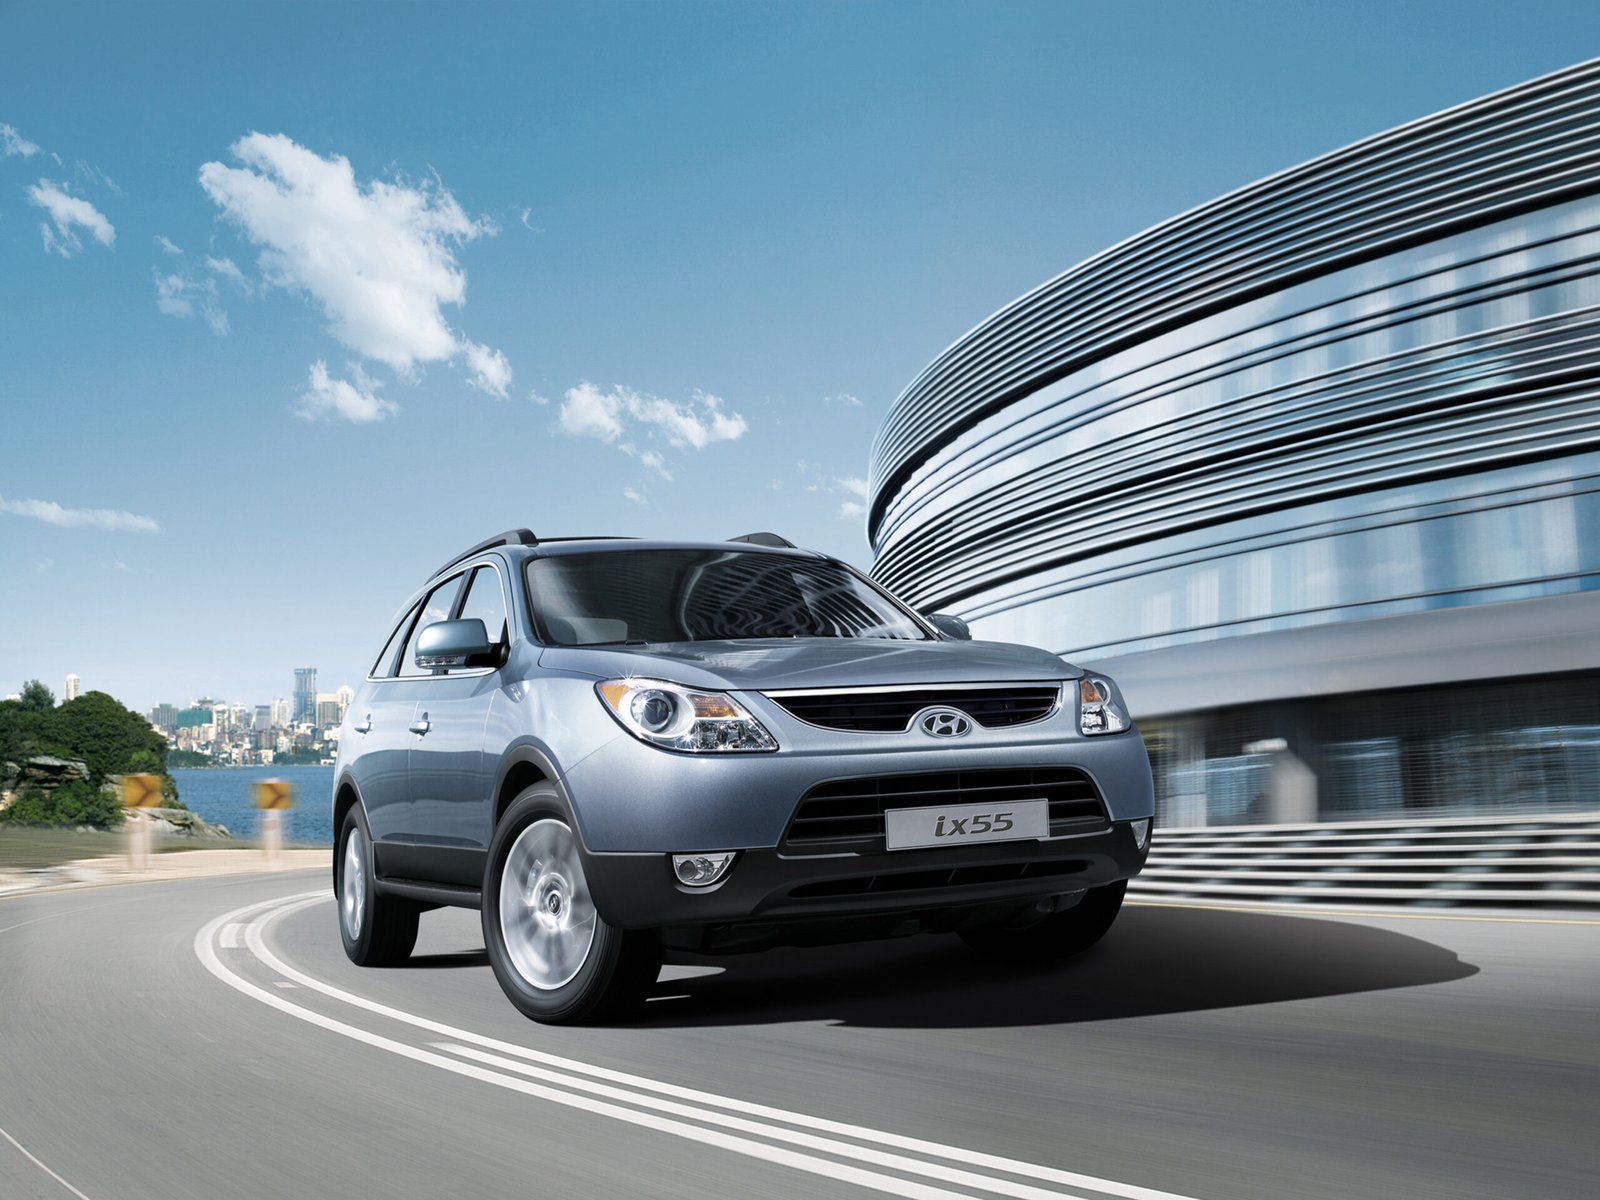 Why Purchasing a Used Hyundai Car Will be your Best Investment?